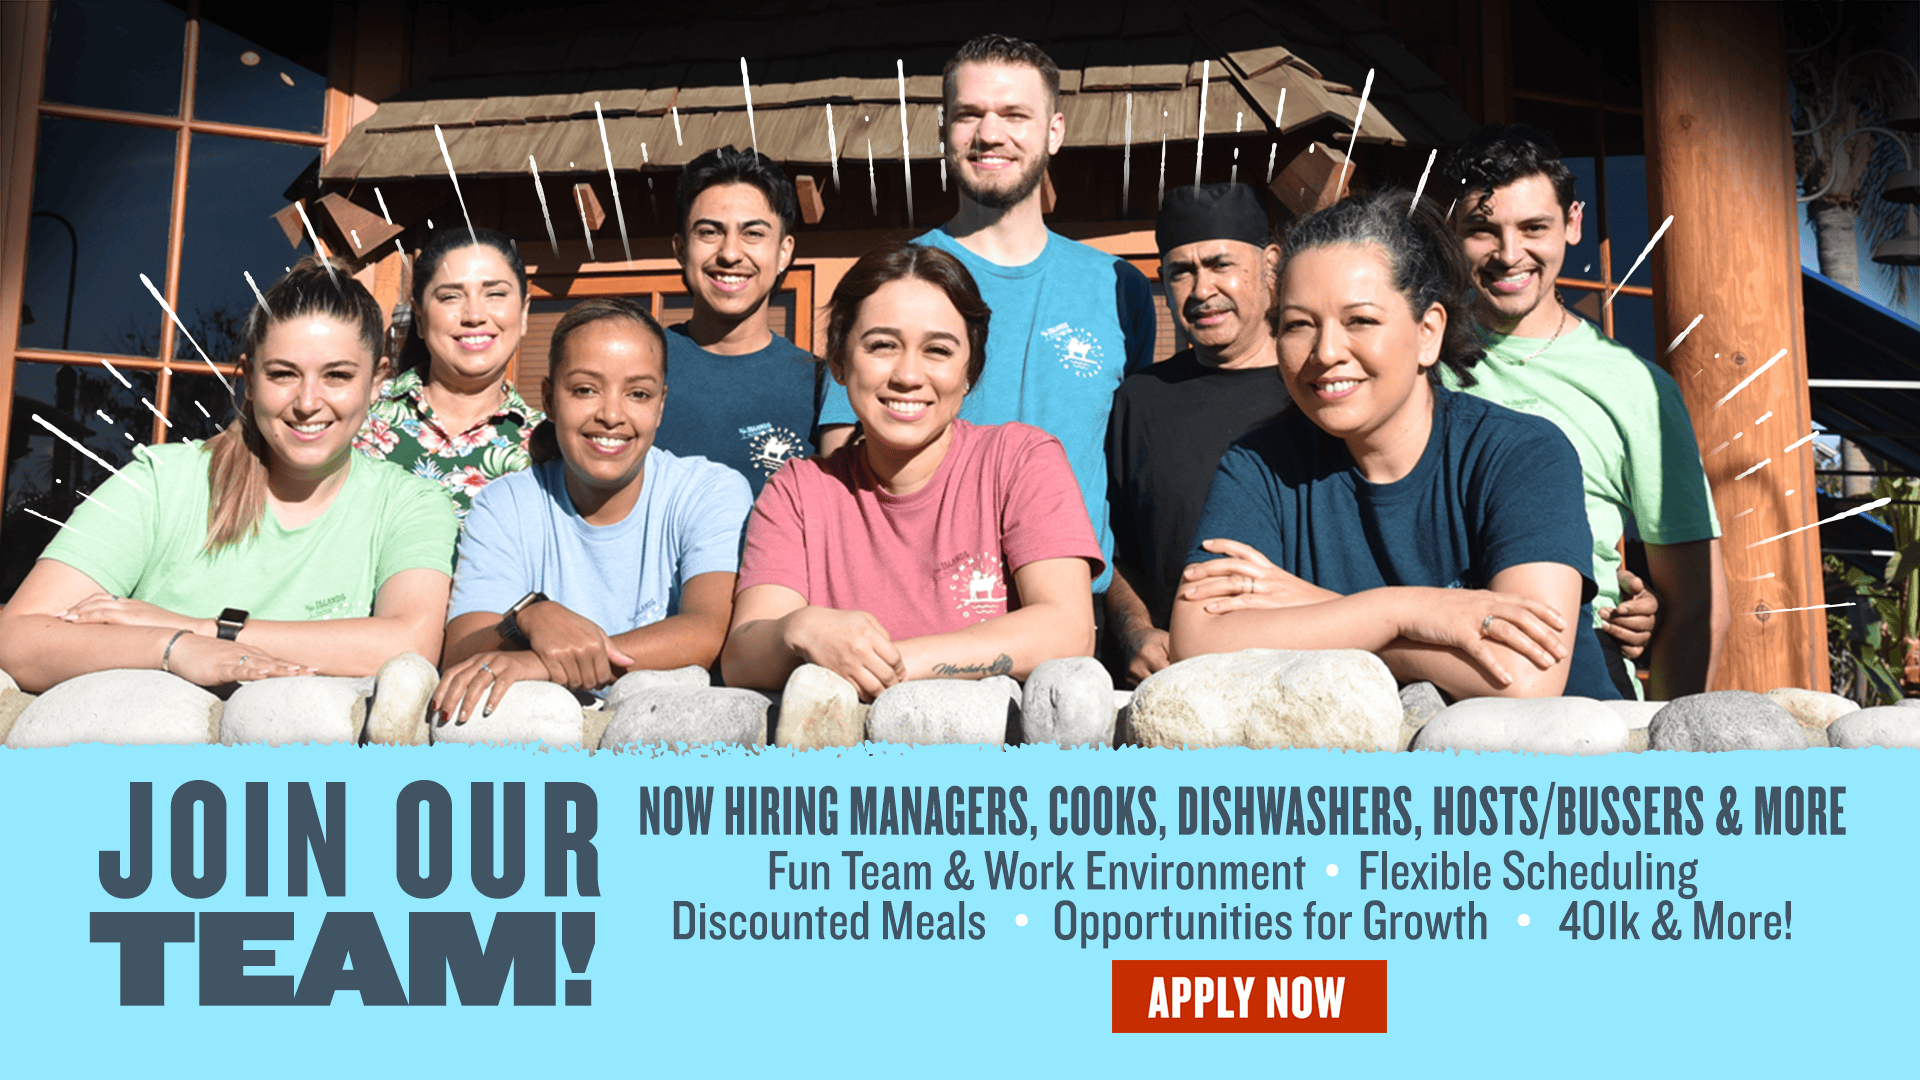 Join Our Team! Now hiring managers, cooks, dishwashers, hosts/bussers & more. Fun team & work environment. Flexible scheduling. Discounted meals. Opportunities for growth. 401K & More! Apply Now